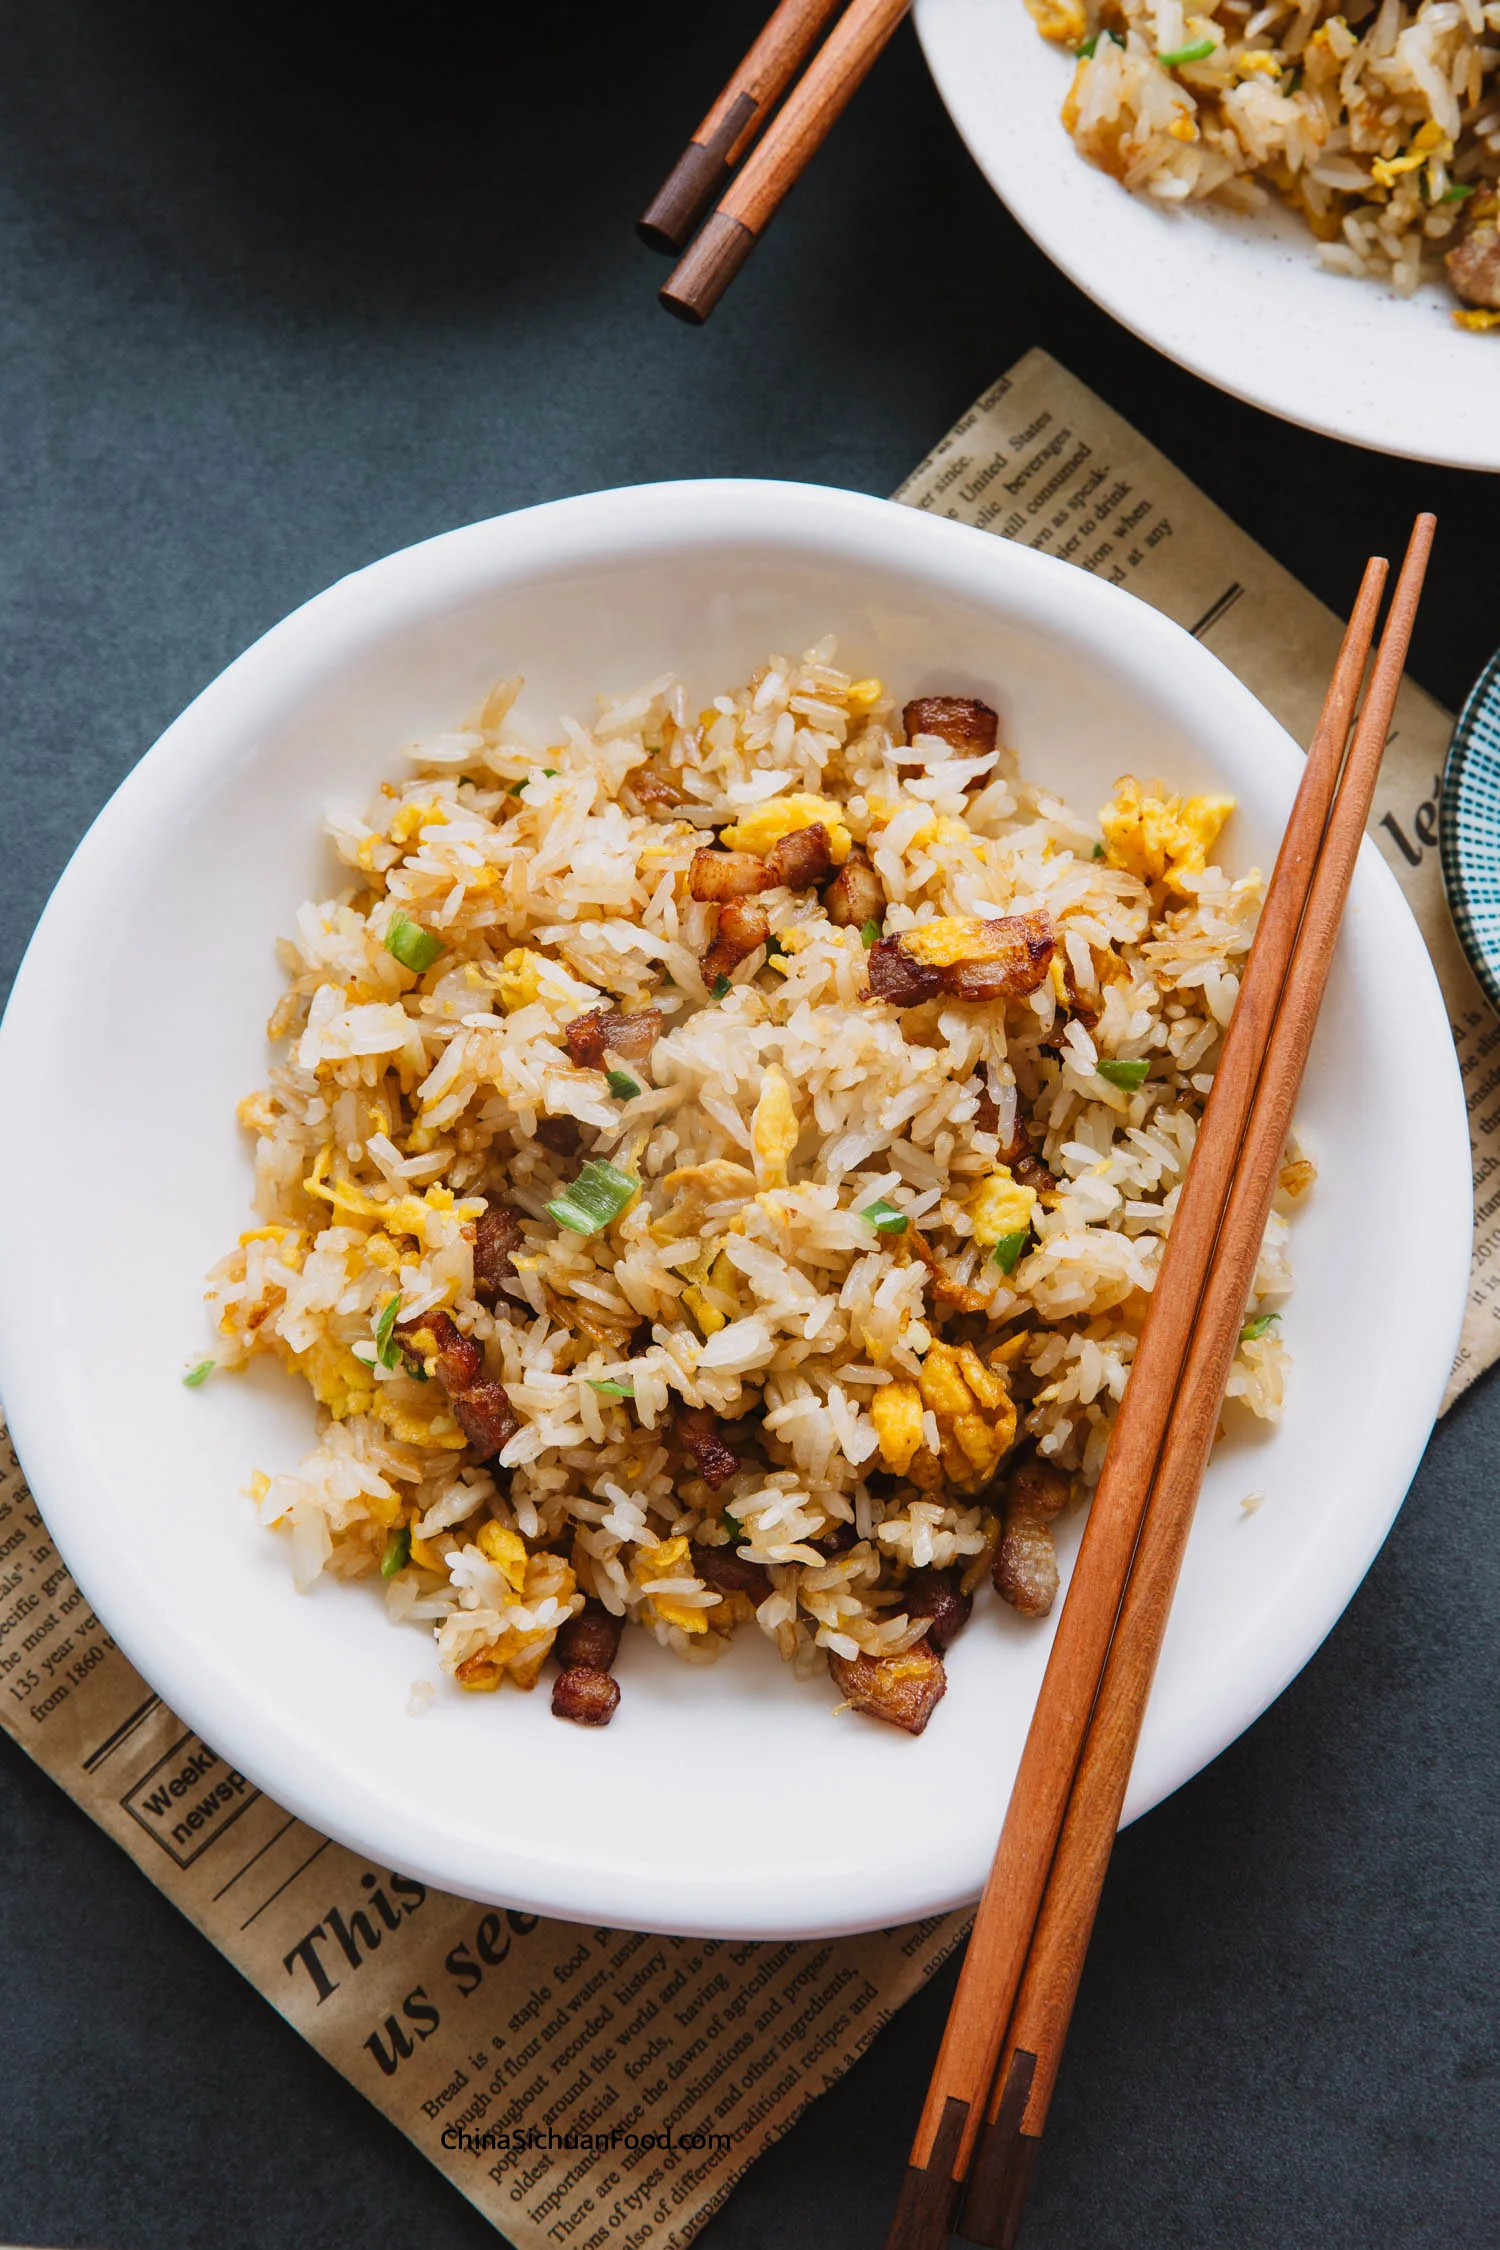 pork belly fried rice|chinasichuanfood.com